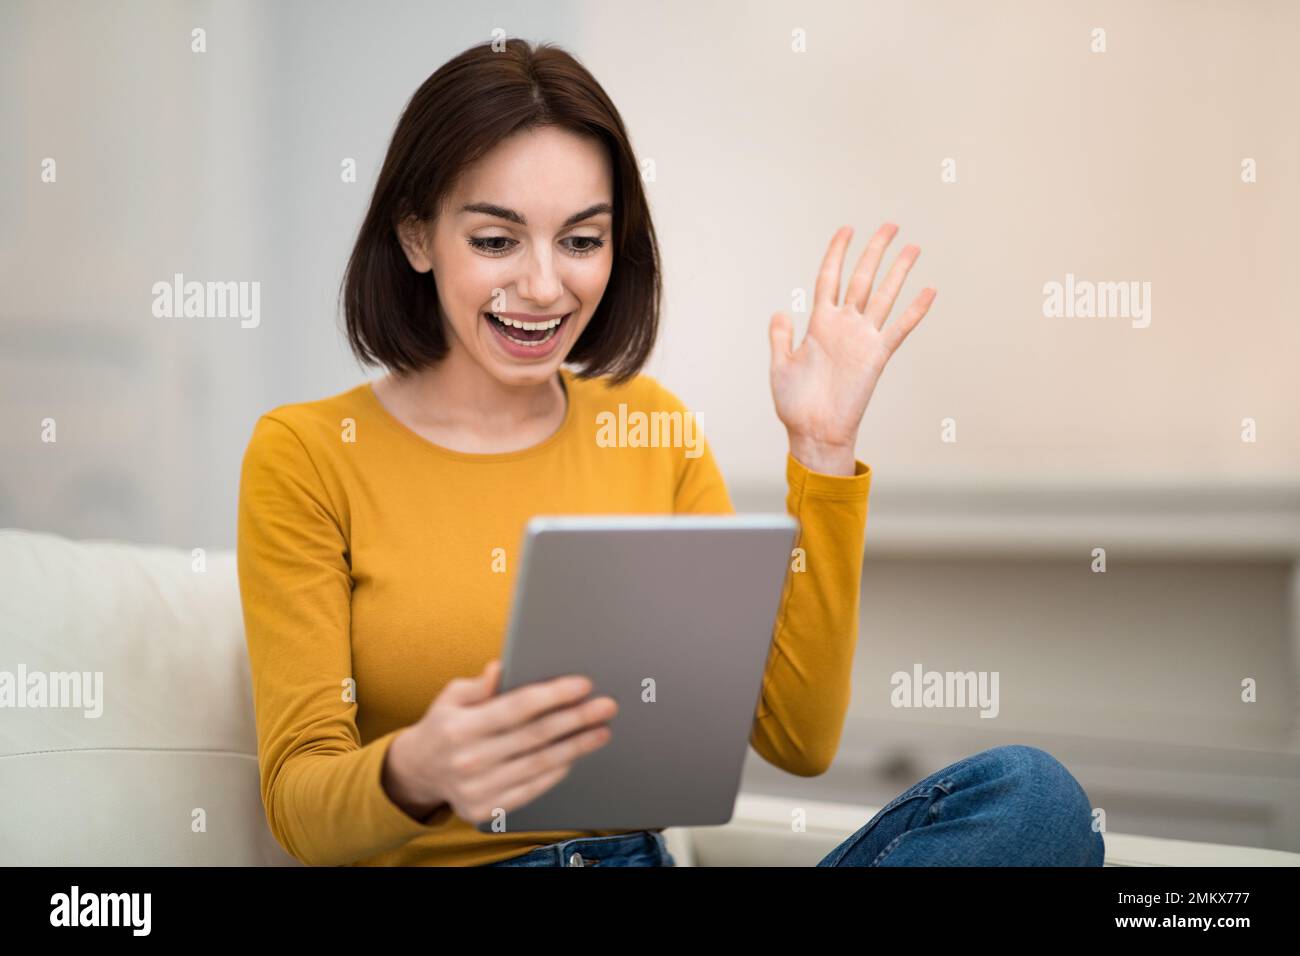 Excited young woman using digital tablet at home Stock Photo